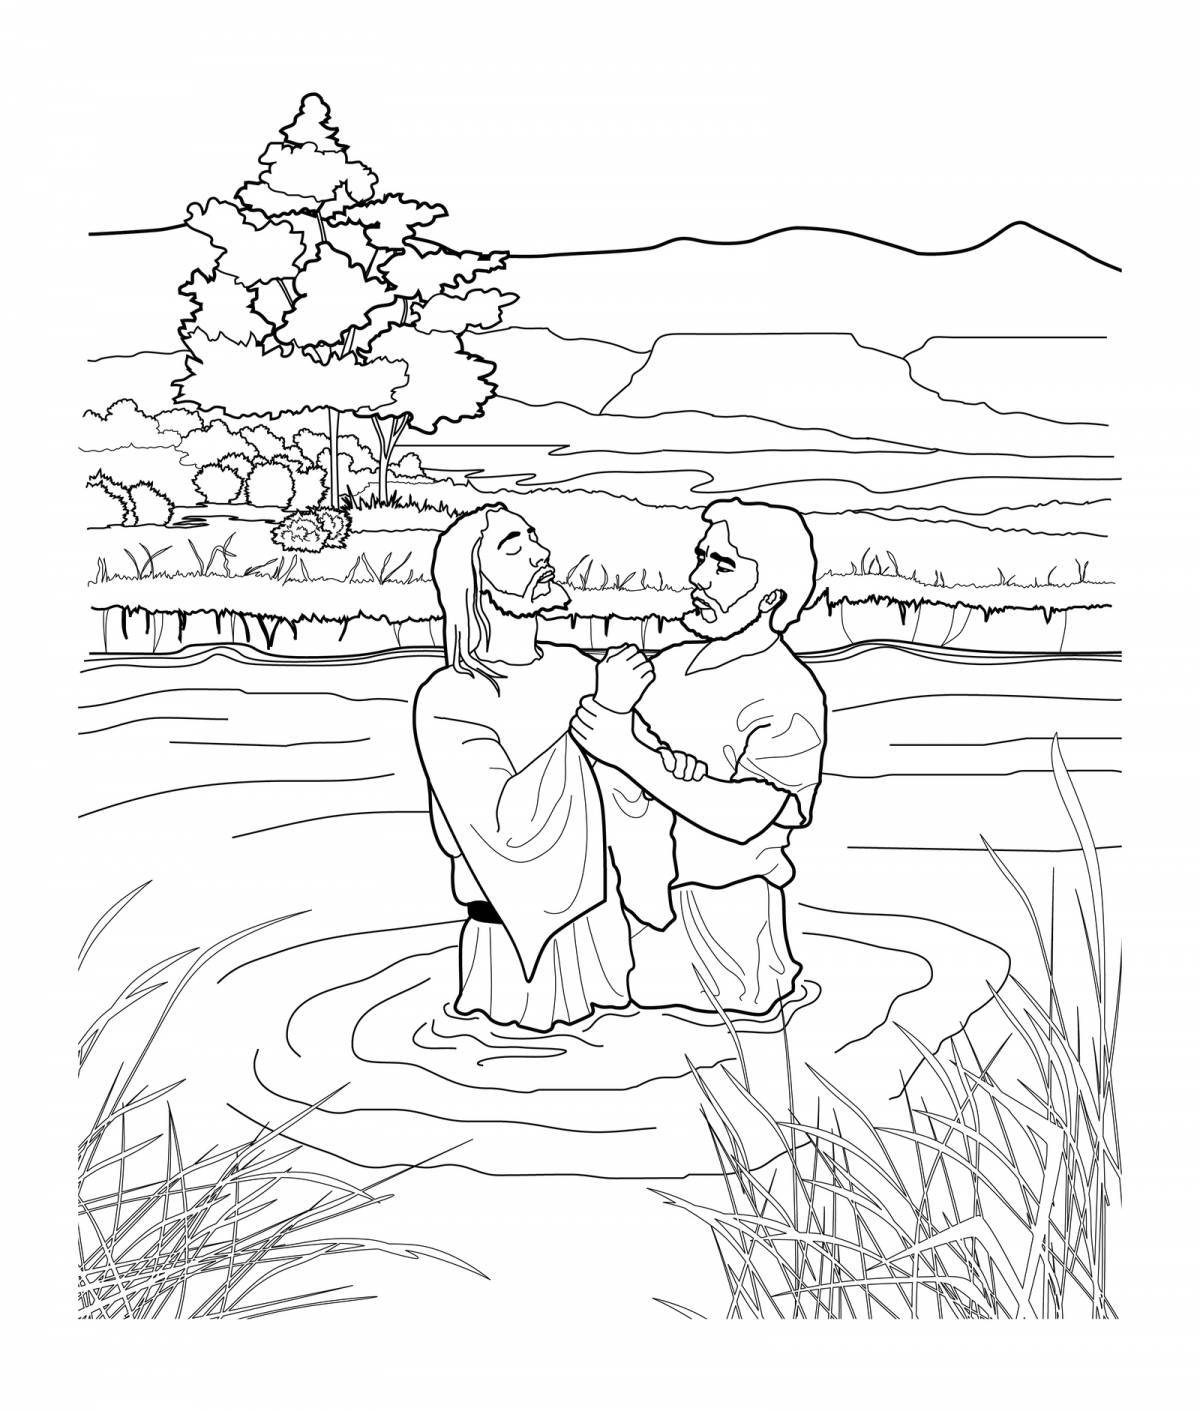 Exquisite baptism coloring book for kids